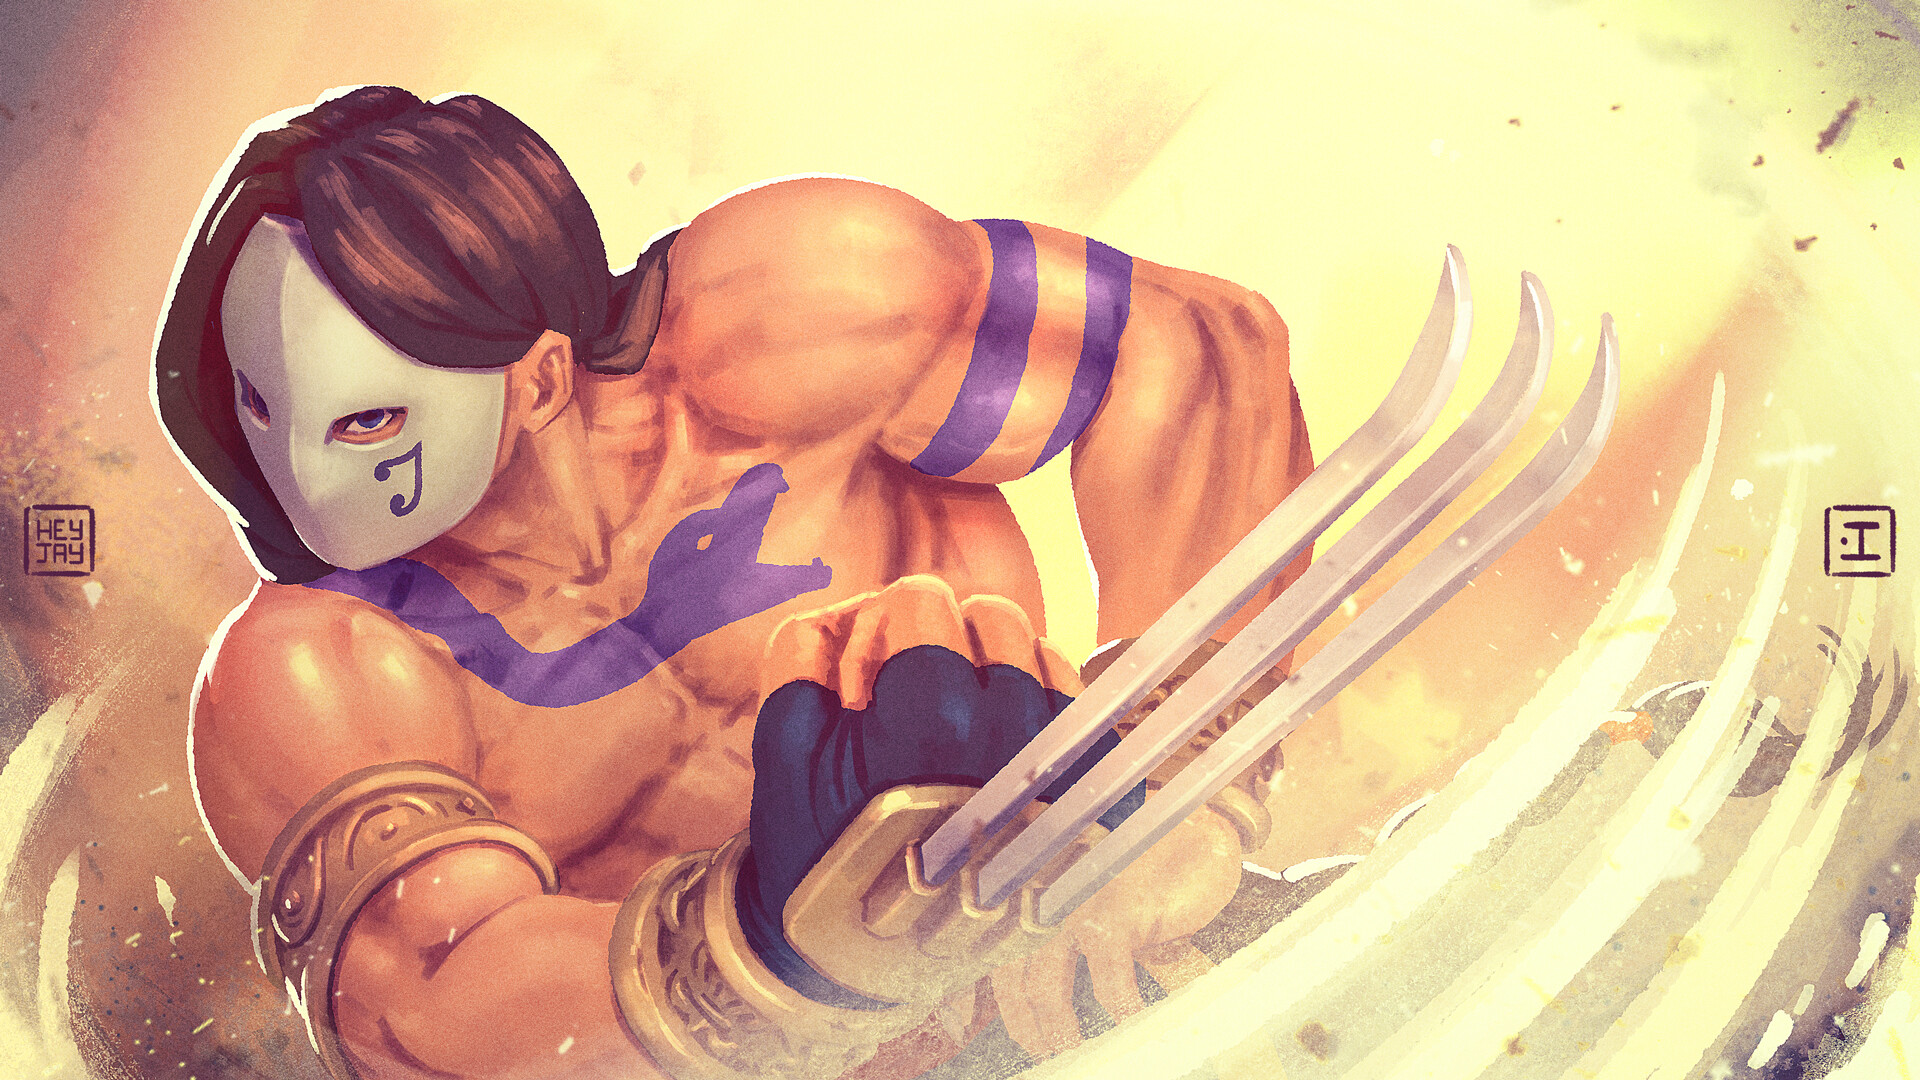 THIS WILL CHANGE THE WAY YOU LOOK AT VEGA STREET FIGHTER 